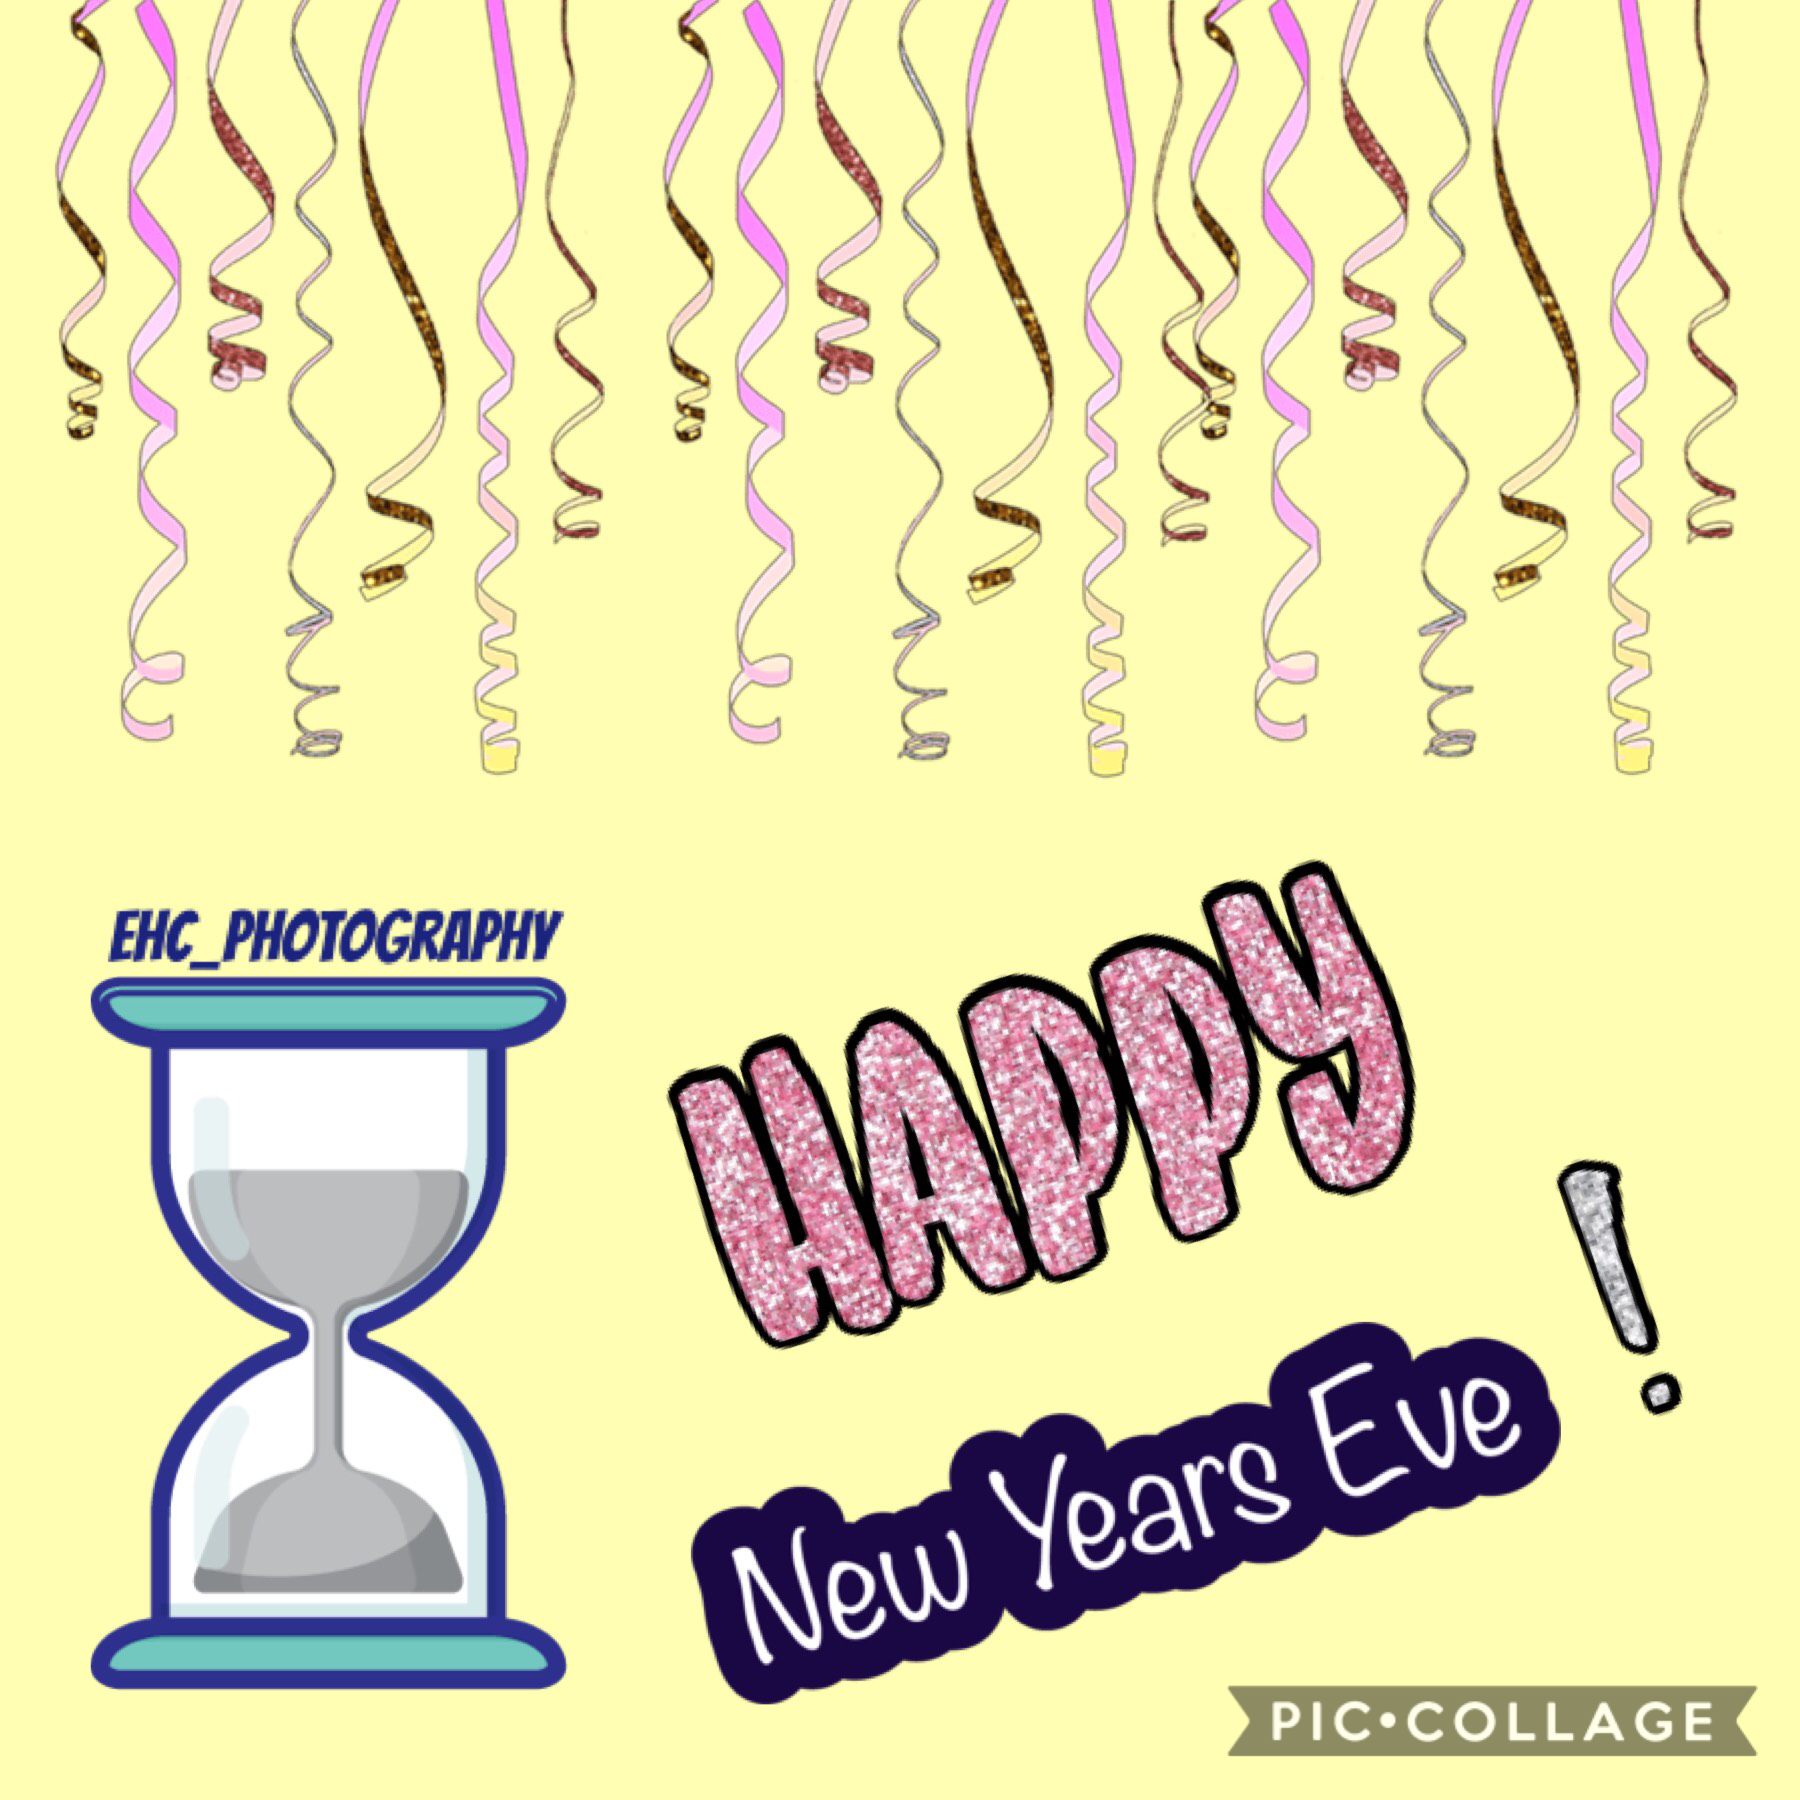 Happy (early) New Years Eve! 🥳 ⏳ 🎊 2️⃣0️⃣1️⃣9️⃣ I can’t believe this year is almost over, so much has happened and not all good, so hopefully next year will be better for me mentally and emotionally. 🗓 Have a safe night guys. 💞